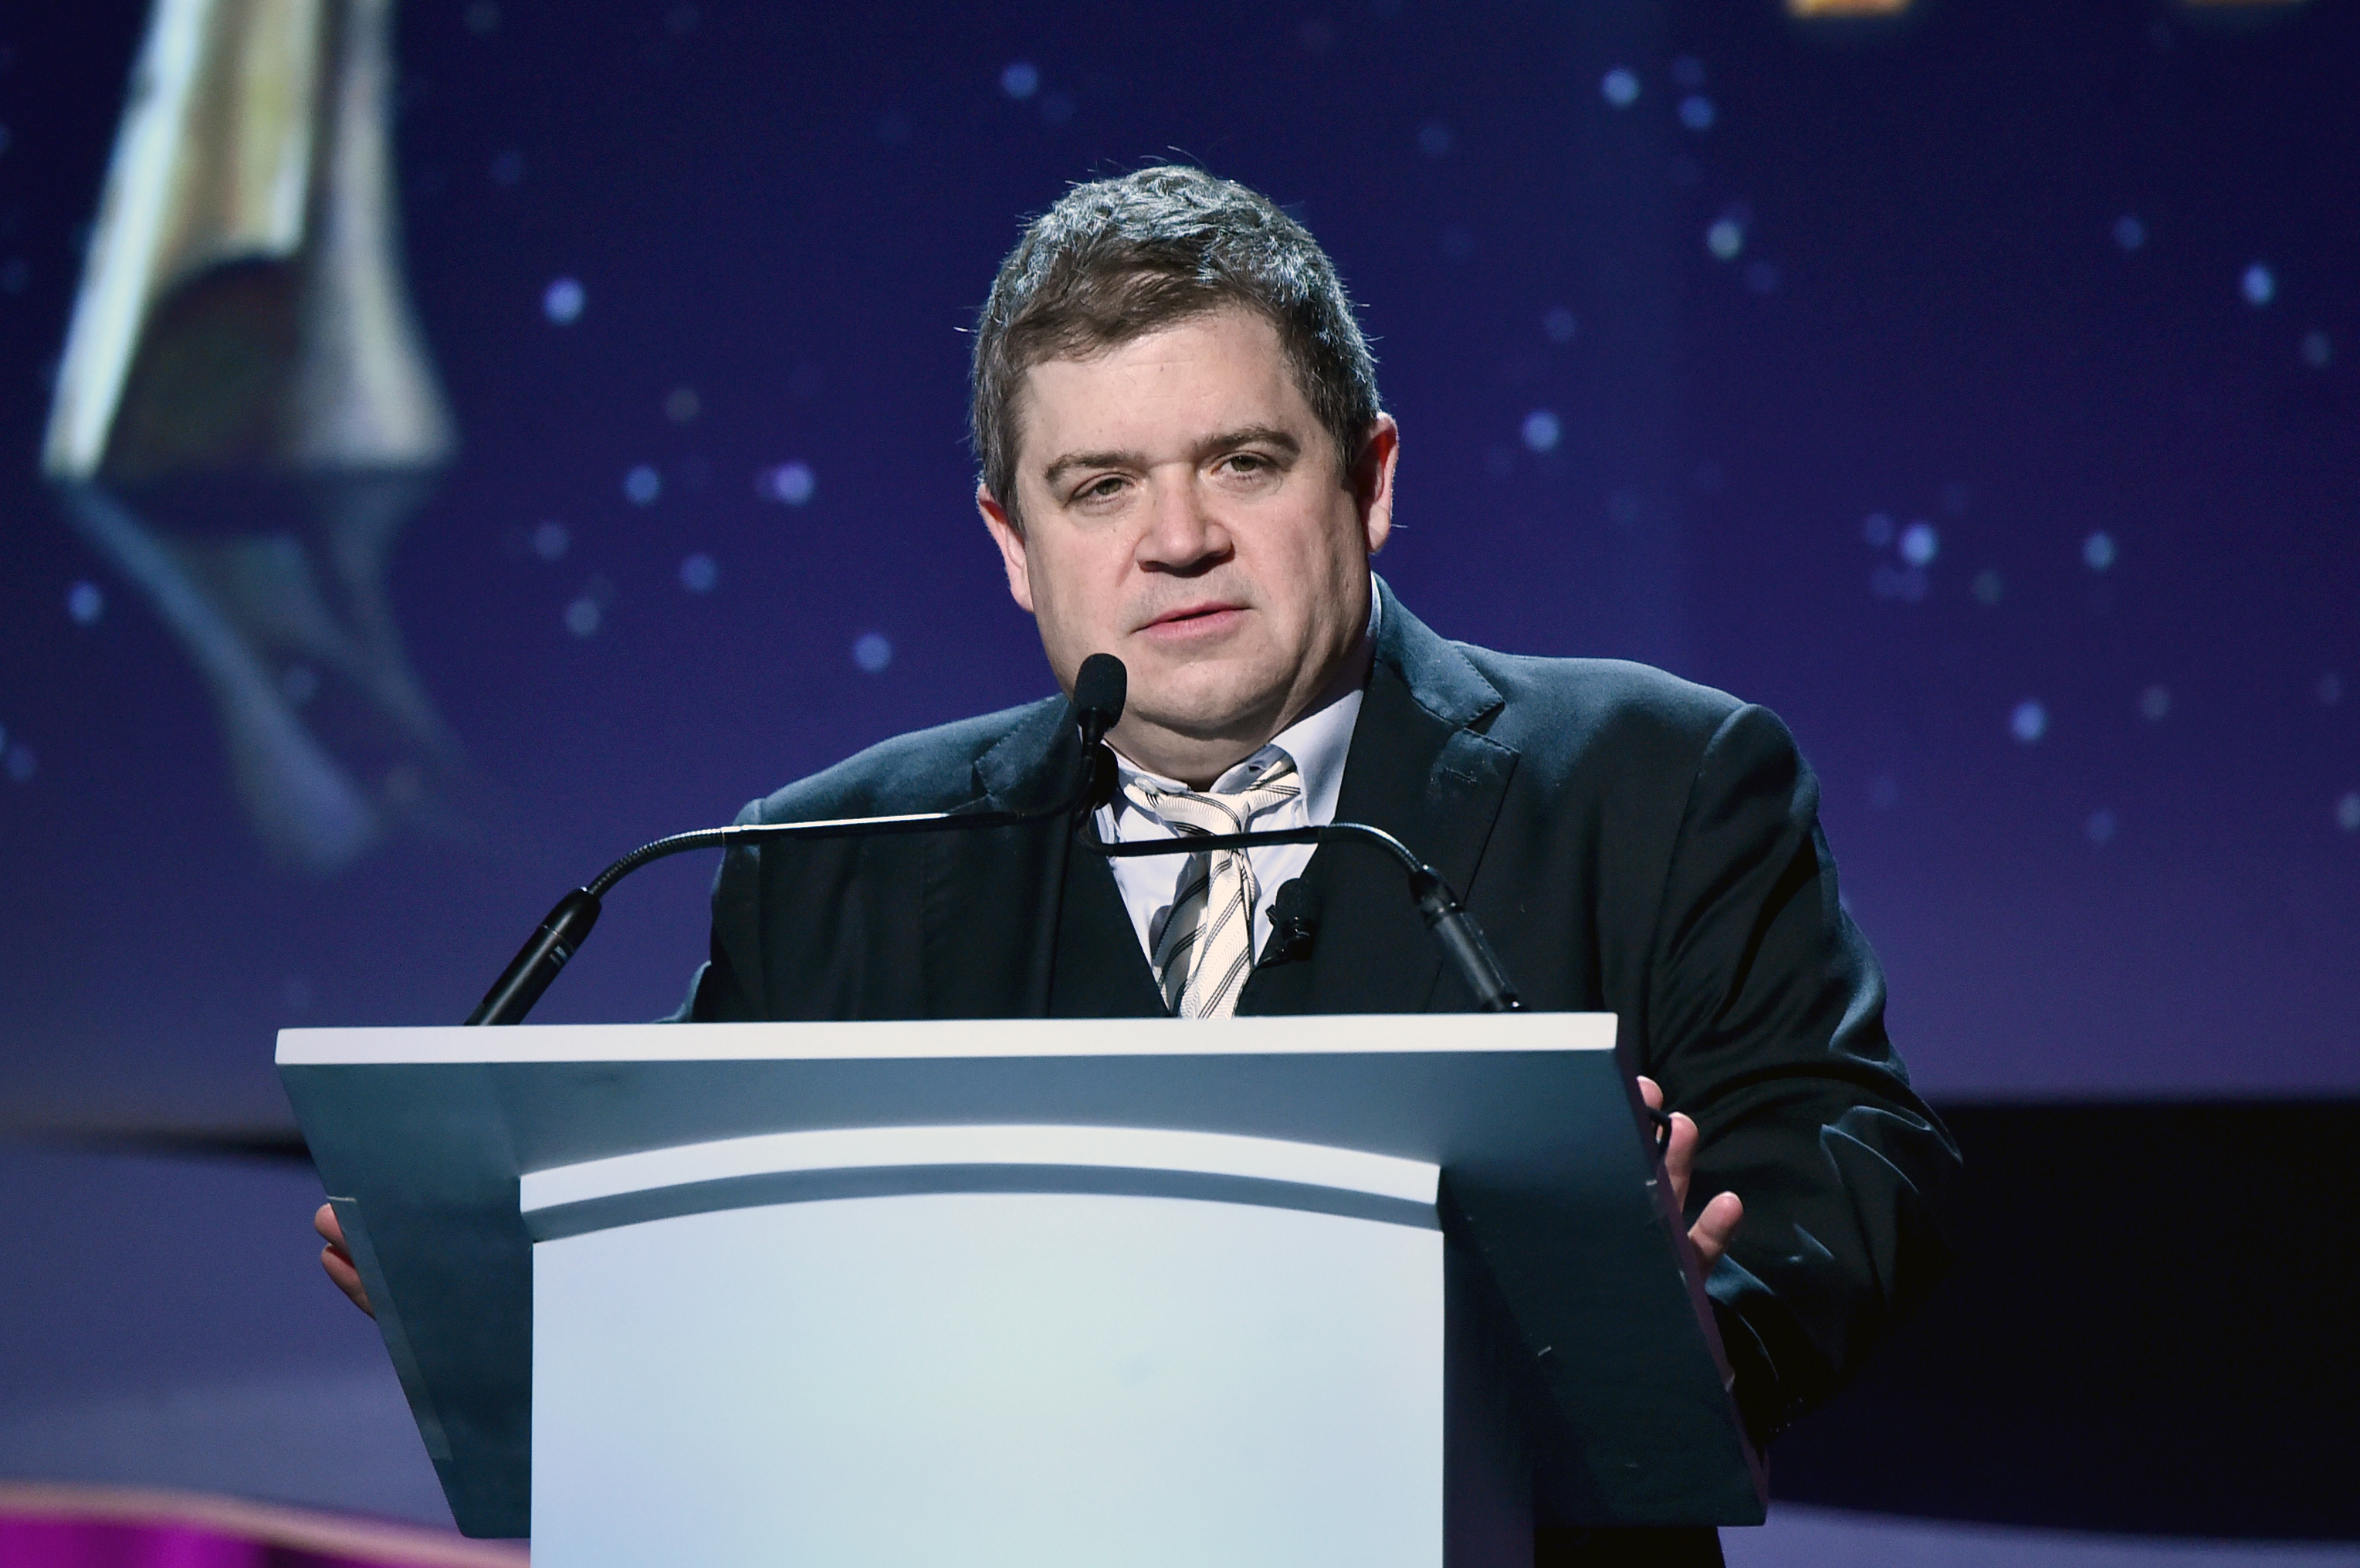 Host Patton Oswalt speaks onstage during the 2016 Writers Guild Awards at the Hyatt Regency Century Plaza on February 13, 2016 in Los Angeles, California. (Alberto E. Rodriguez&mdash; Writers Guild of America, West/Getty Images)